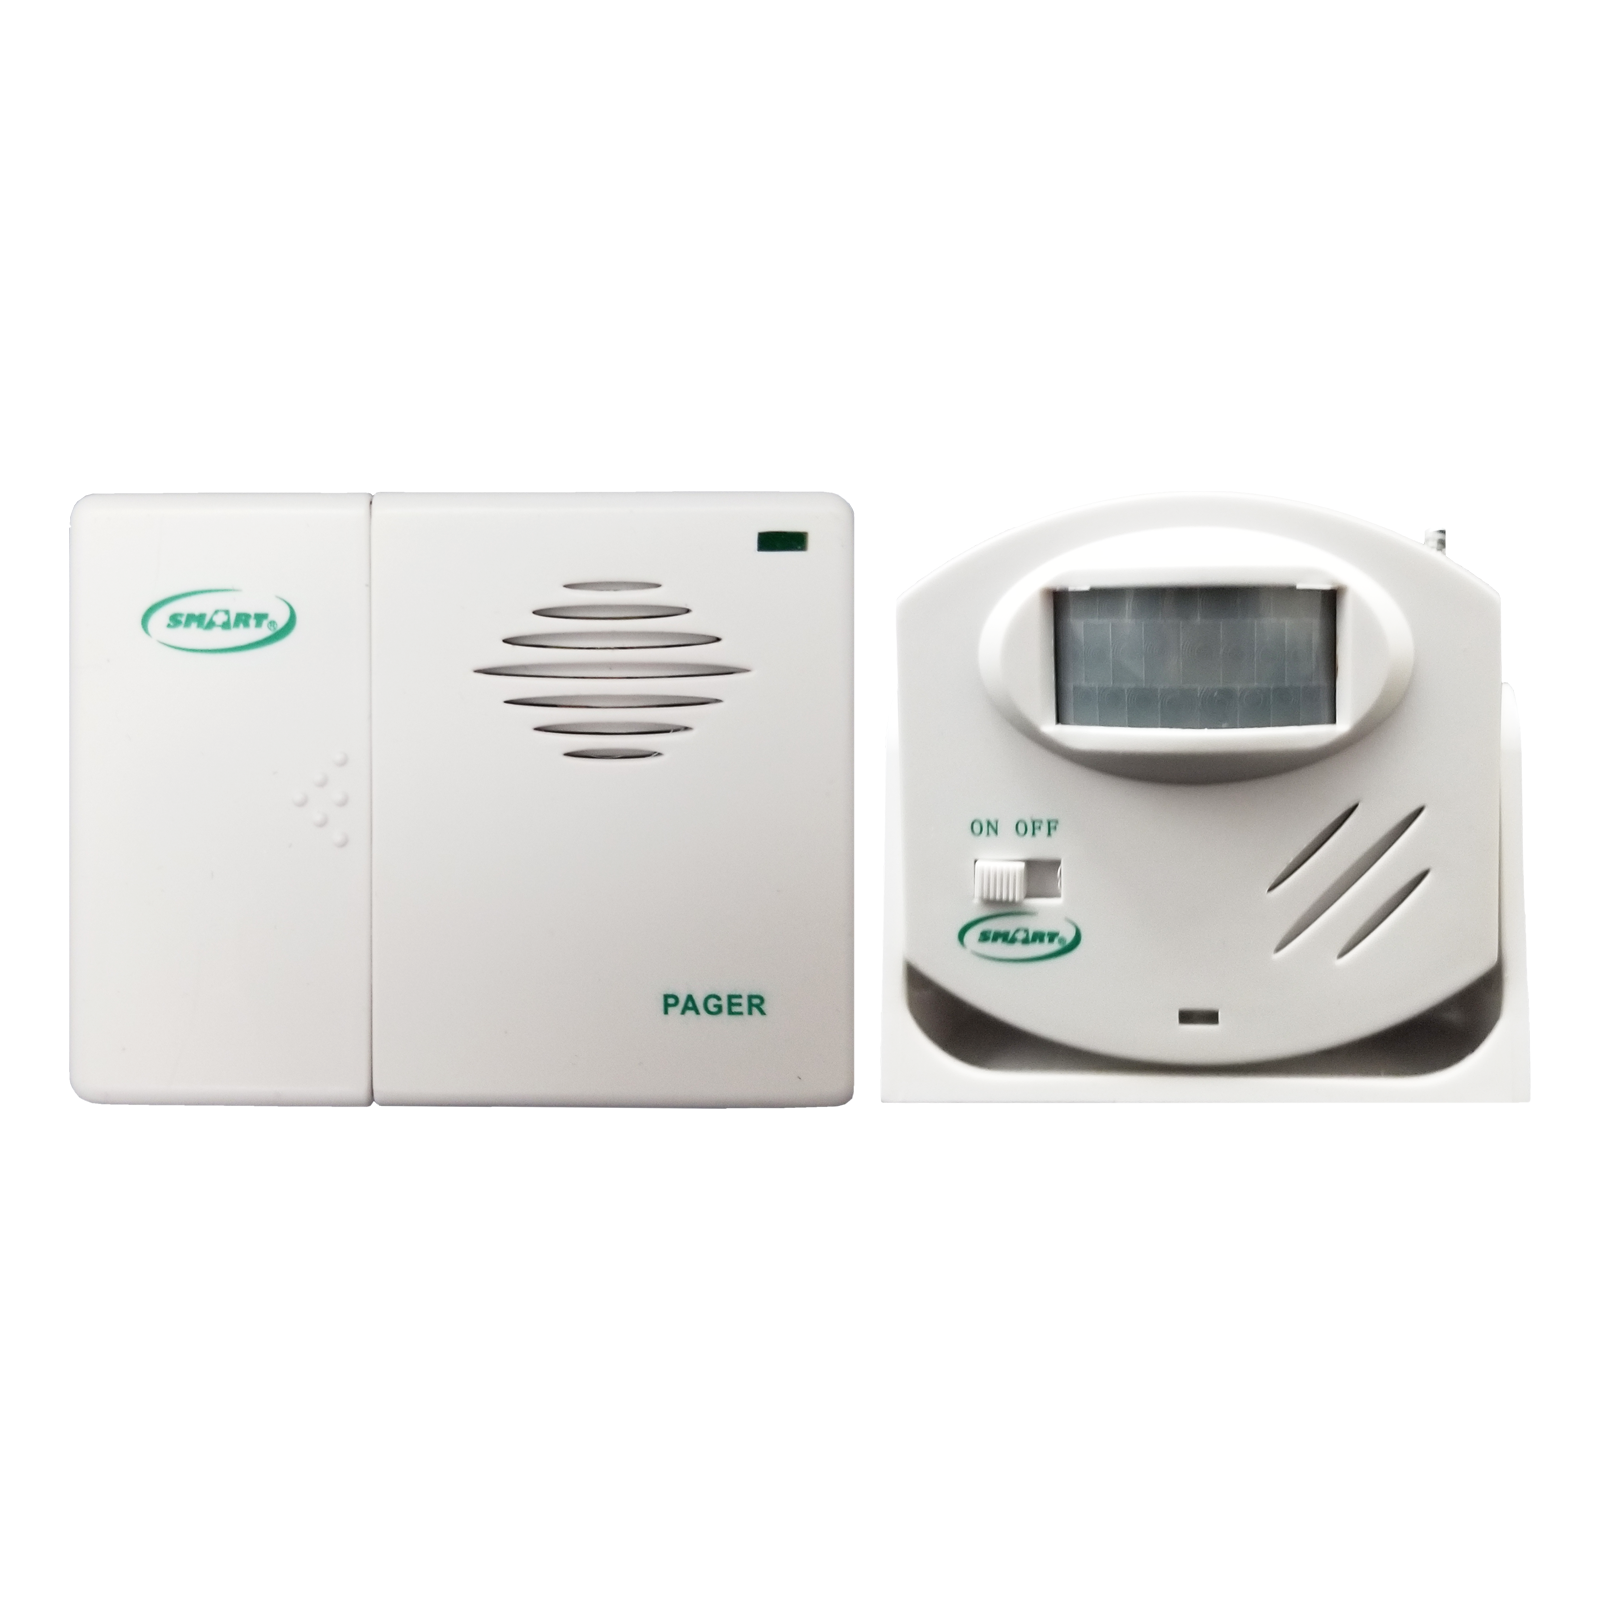 Motion sensor and pager. Alarms for the elderly